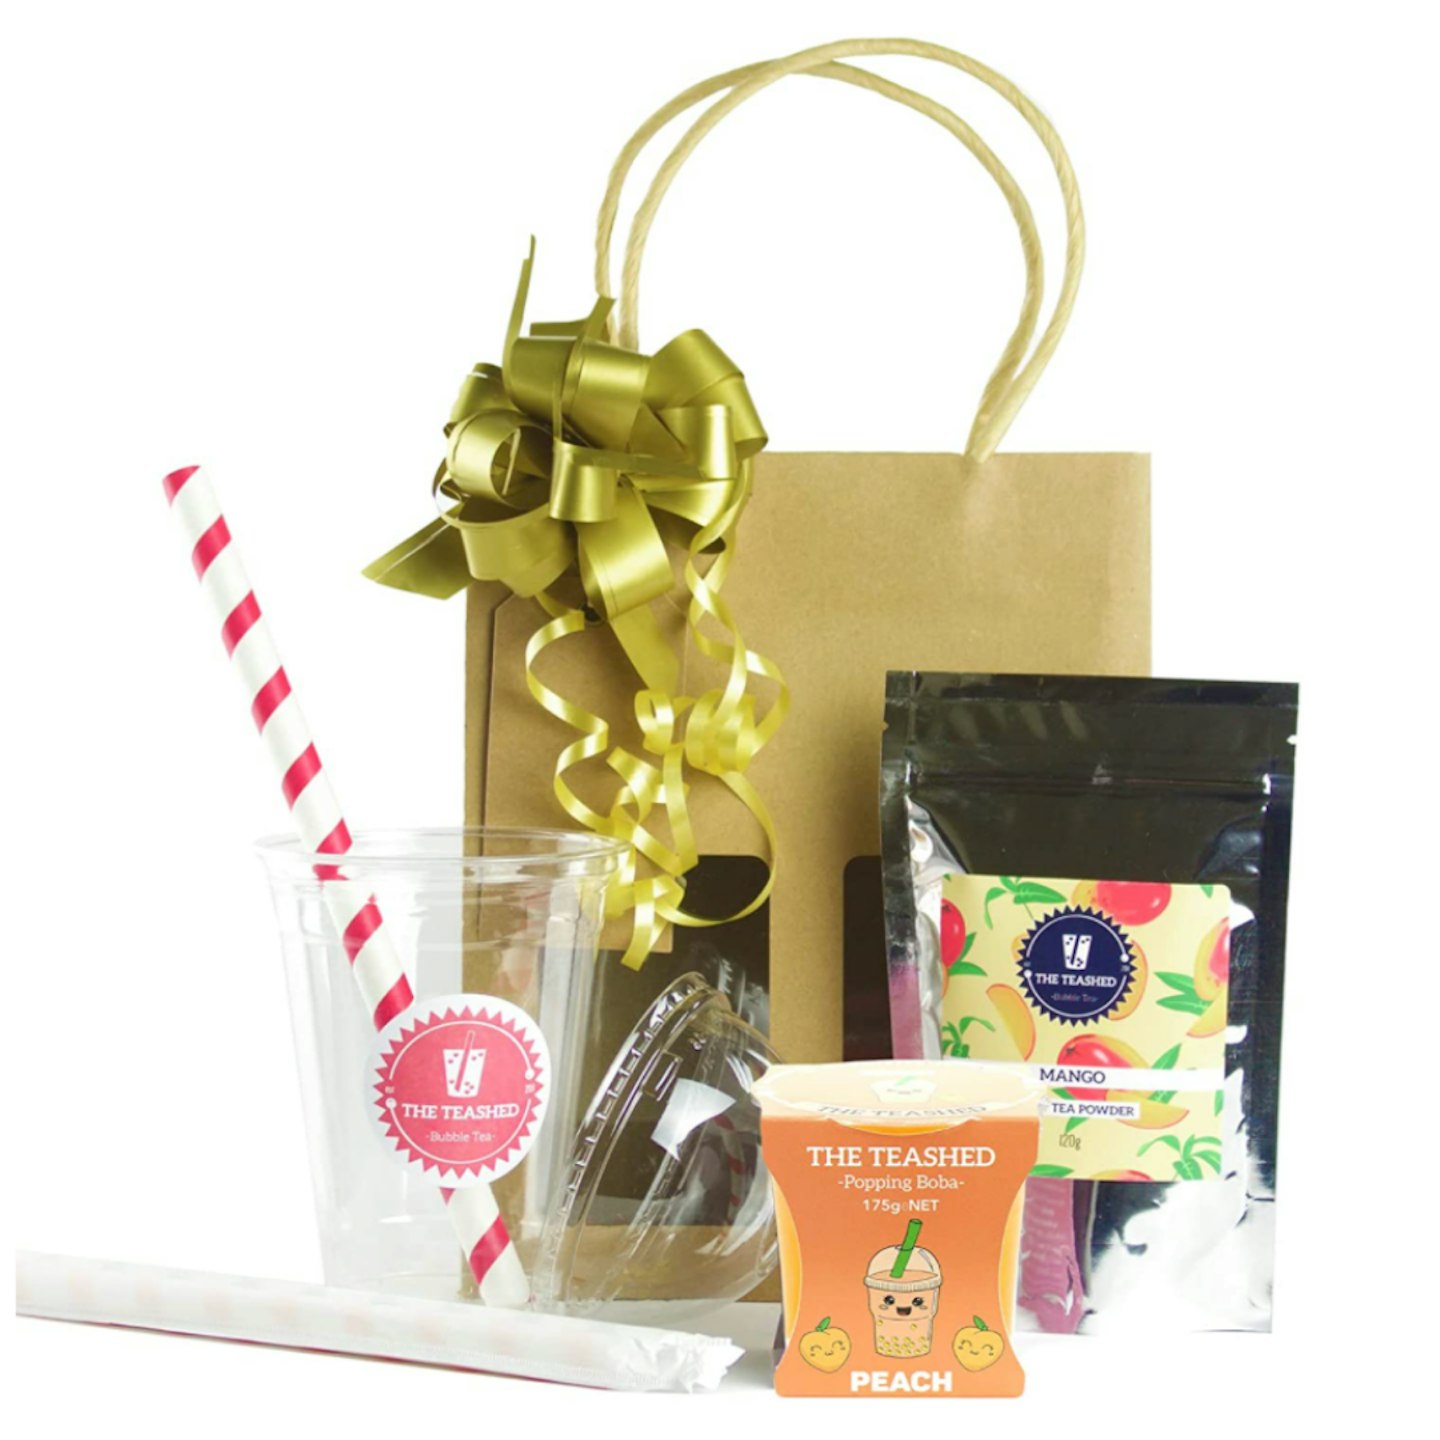 Fruity Bubble Tea Kit Gift Box | 3 Servings | Passion Fruit Syrup,  Strawberry Popping Boba, Tea Bags and Paper Straws | Bubble Tea at Home